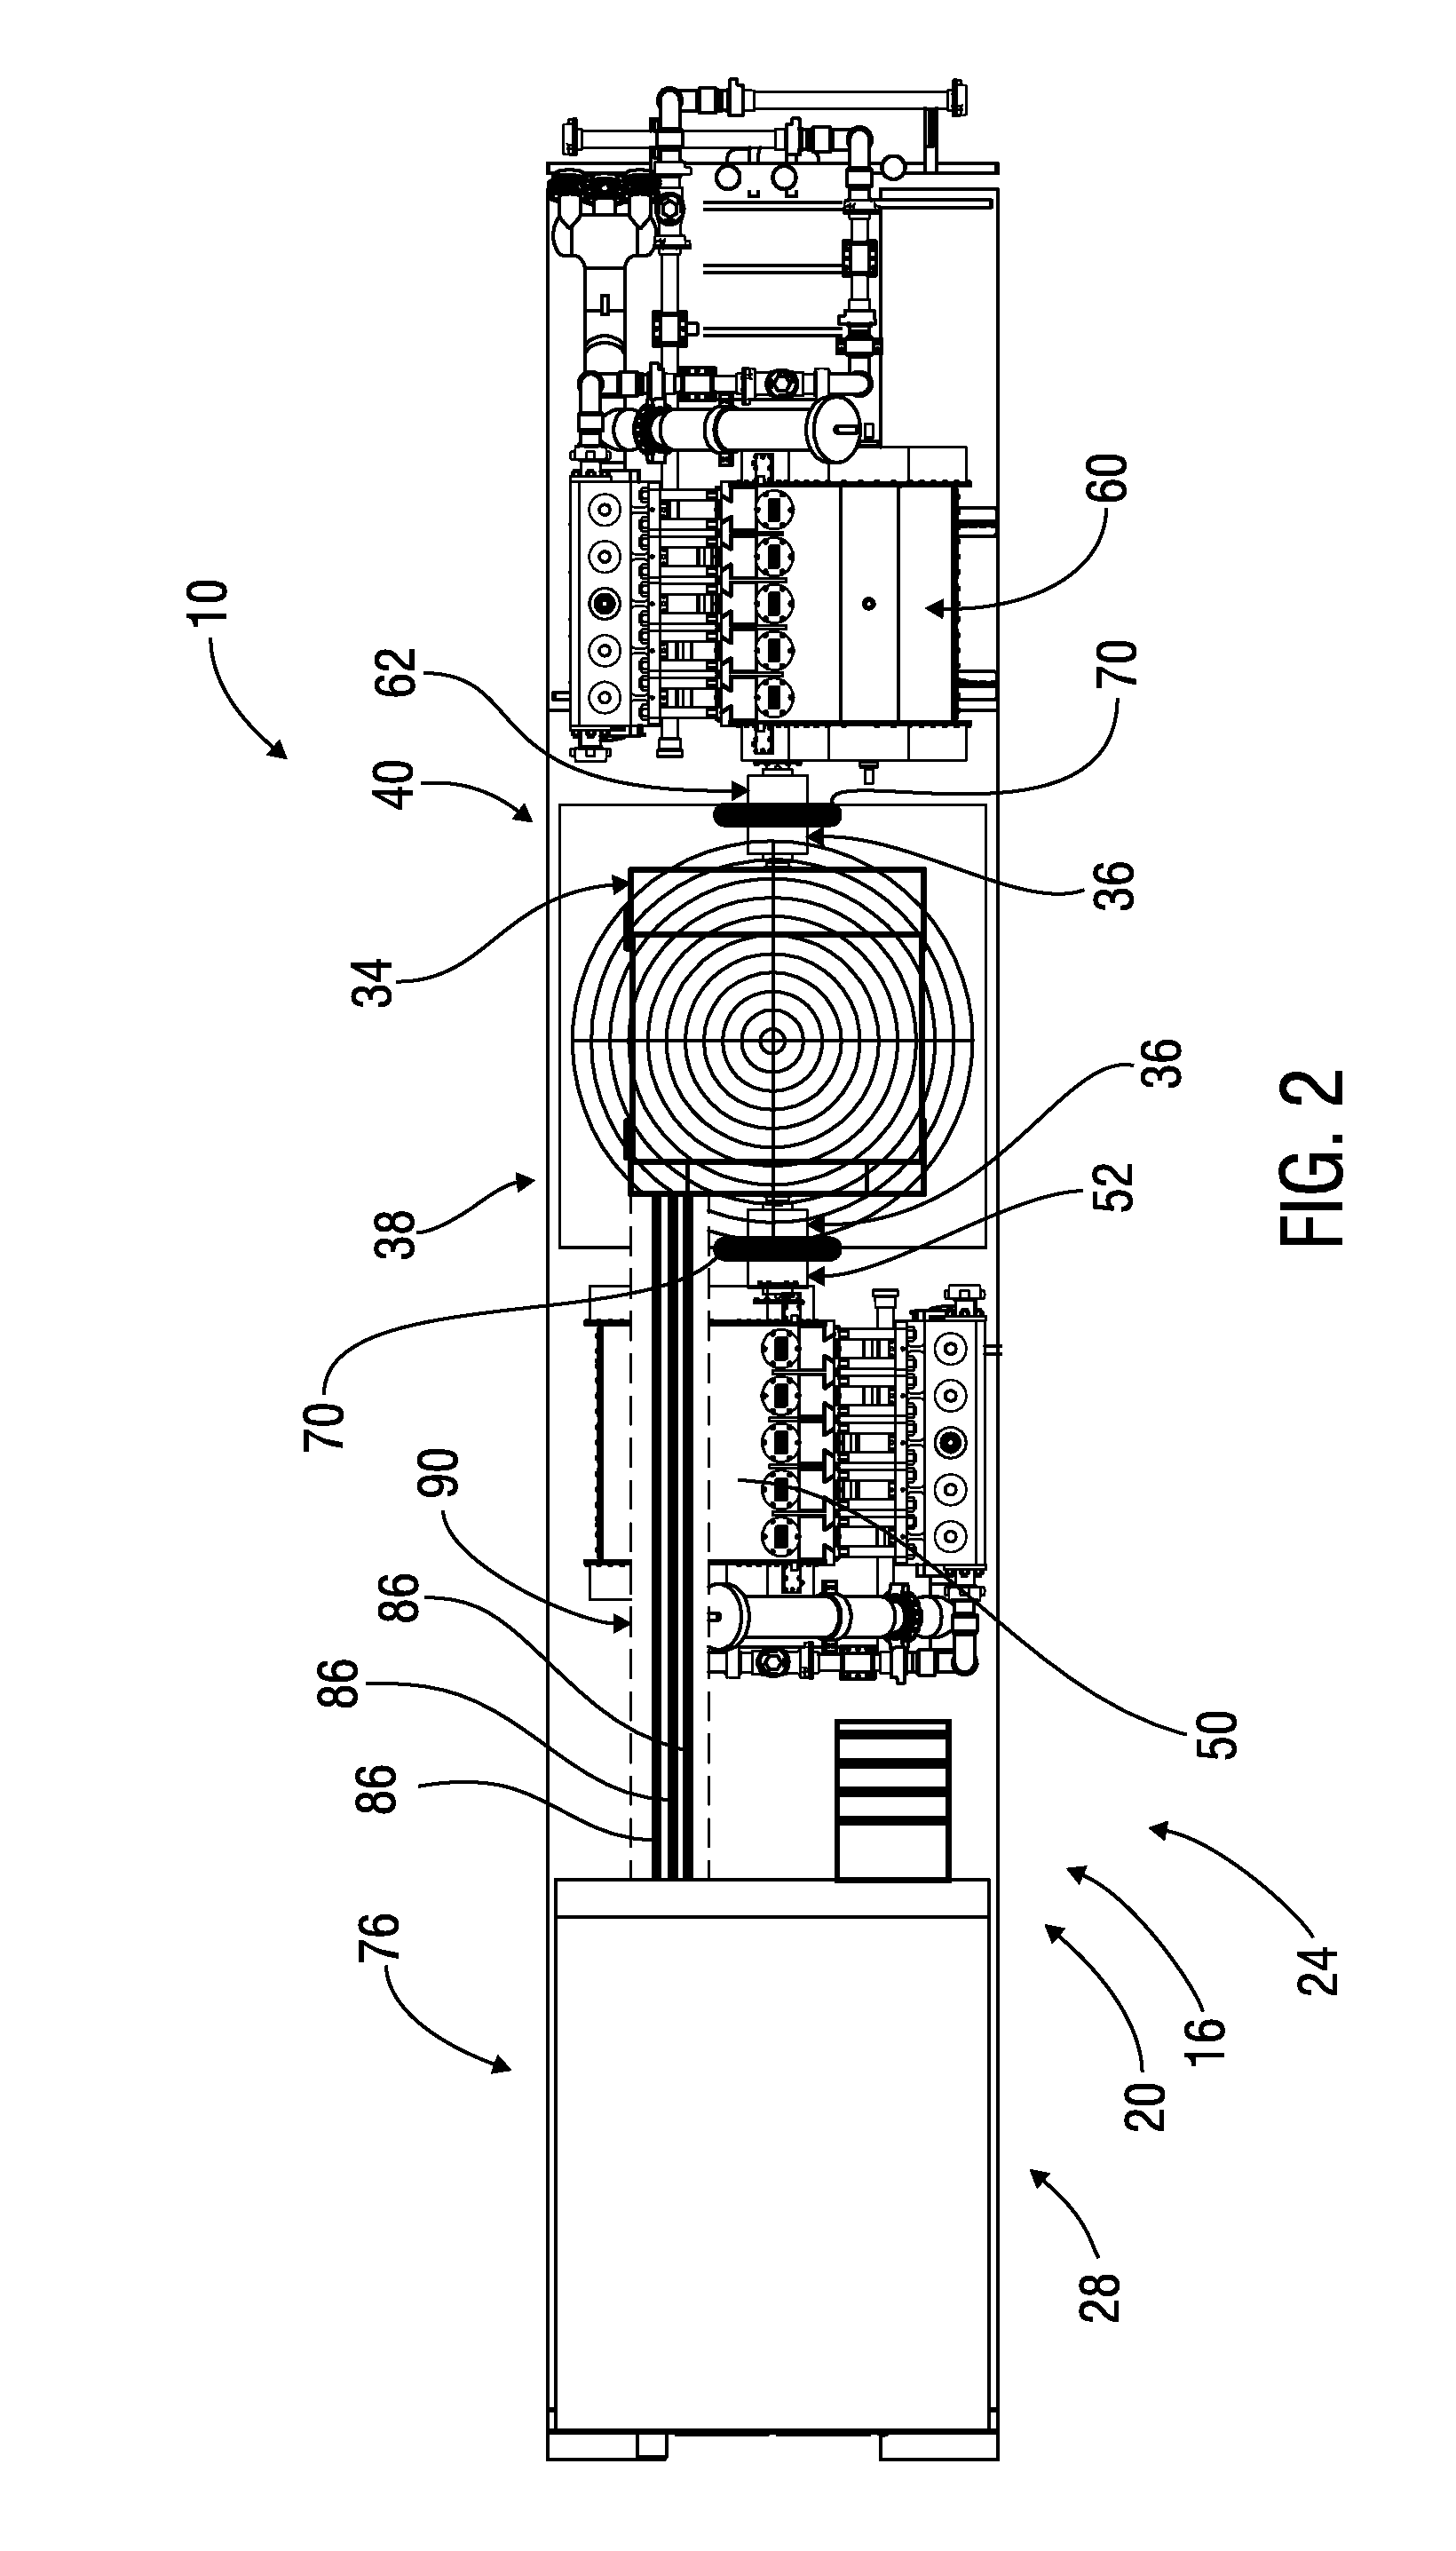 Apparatus and methods for delivering a high volume of fluid into an underground well bore from a mobile pumping unit